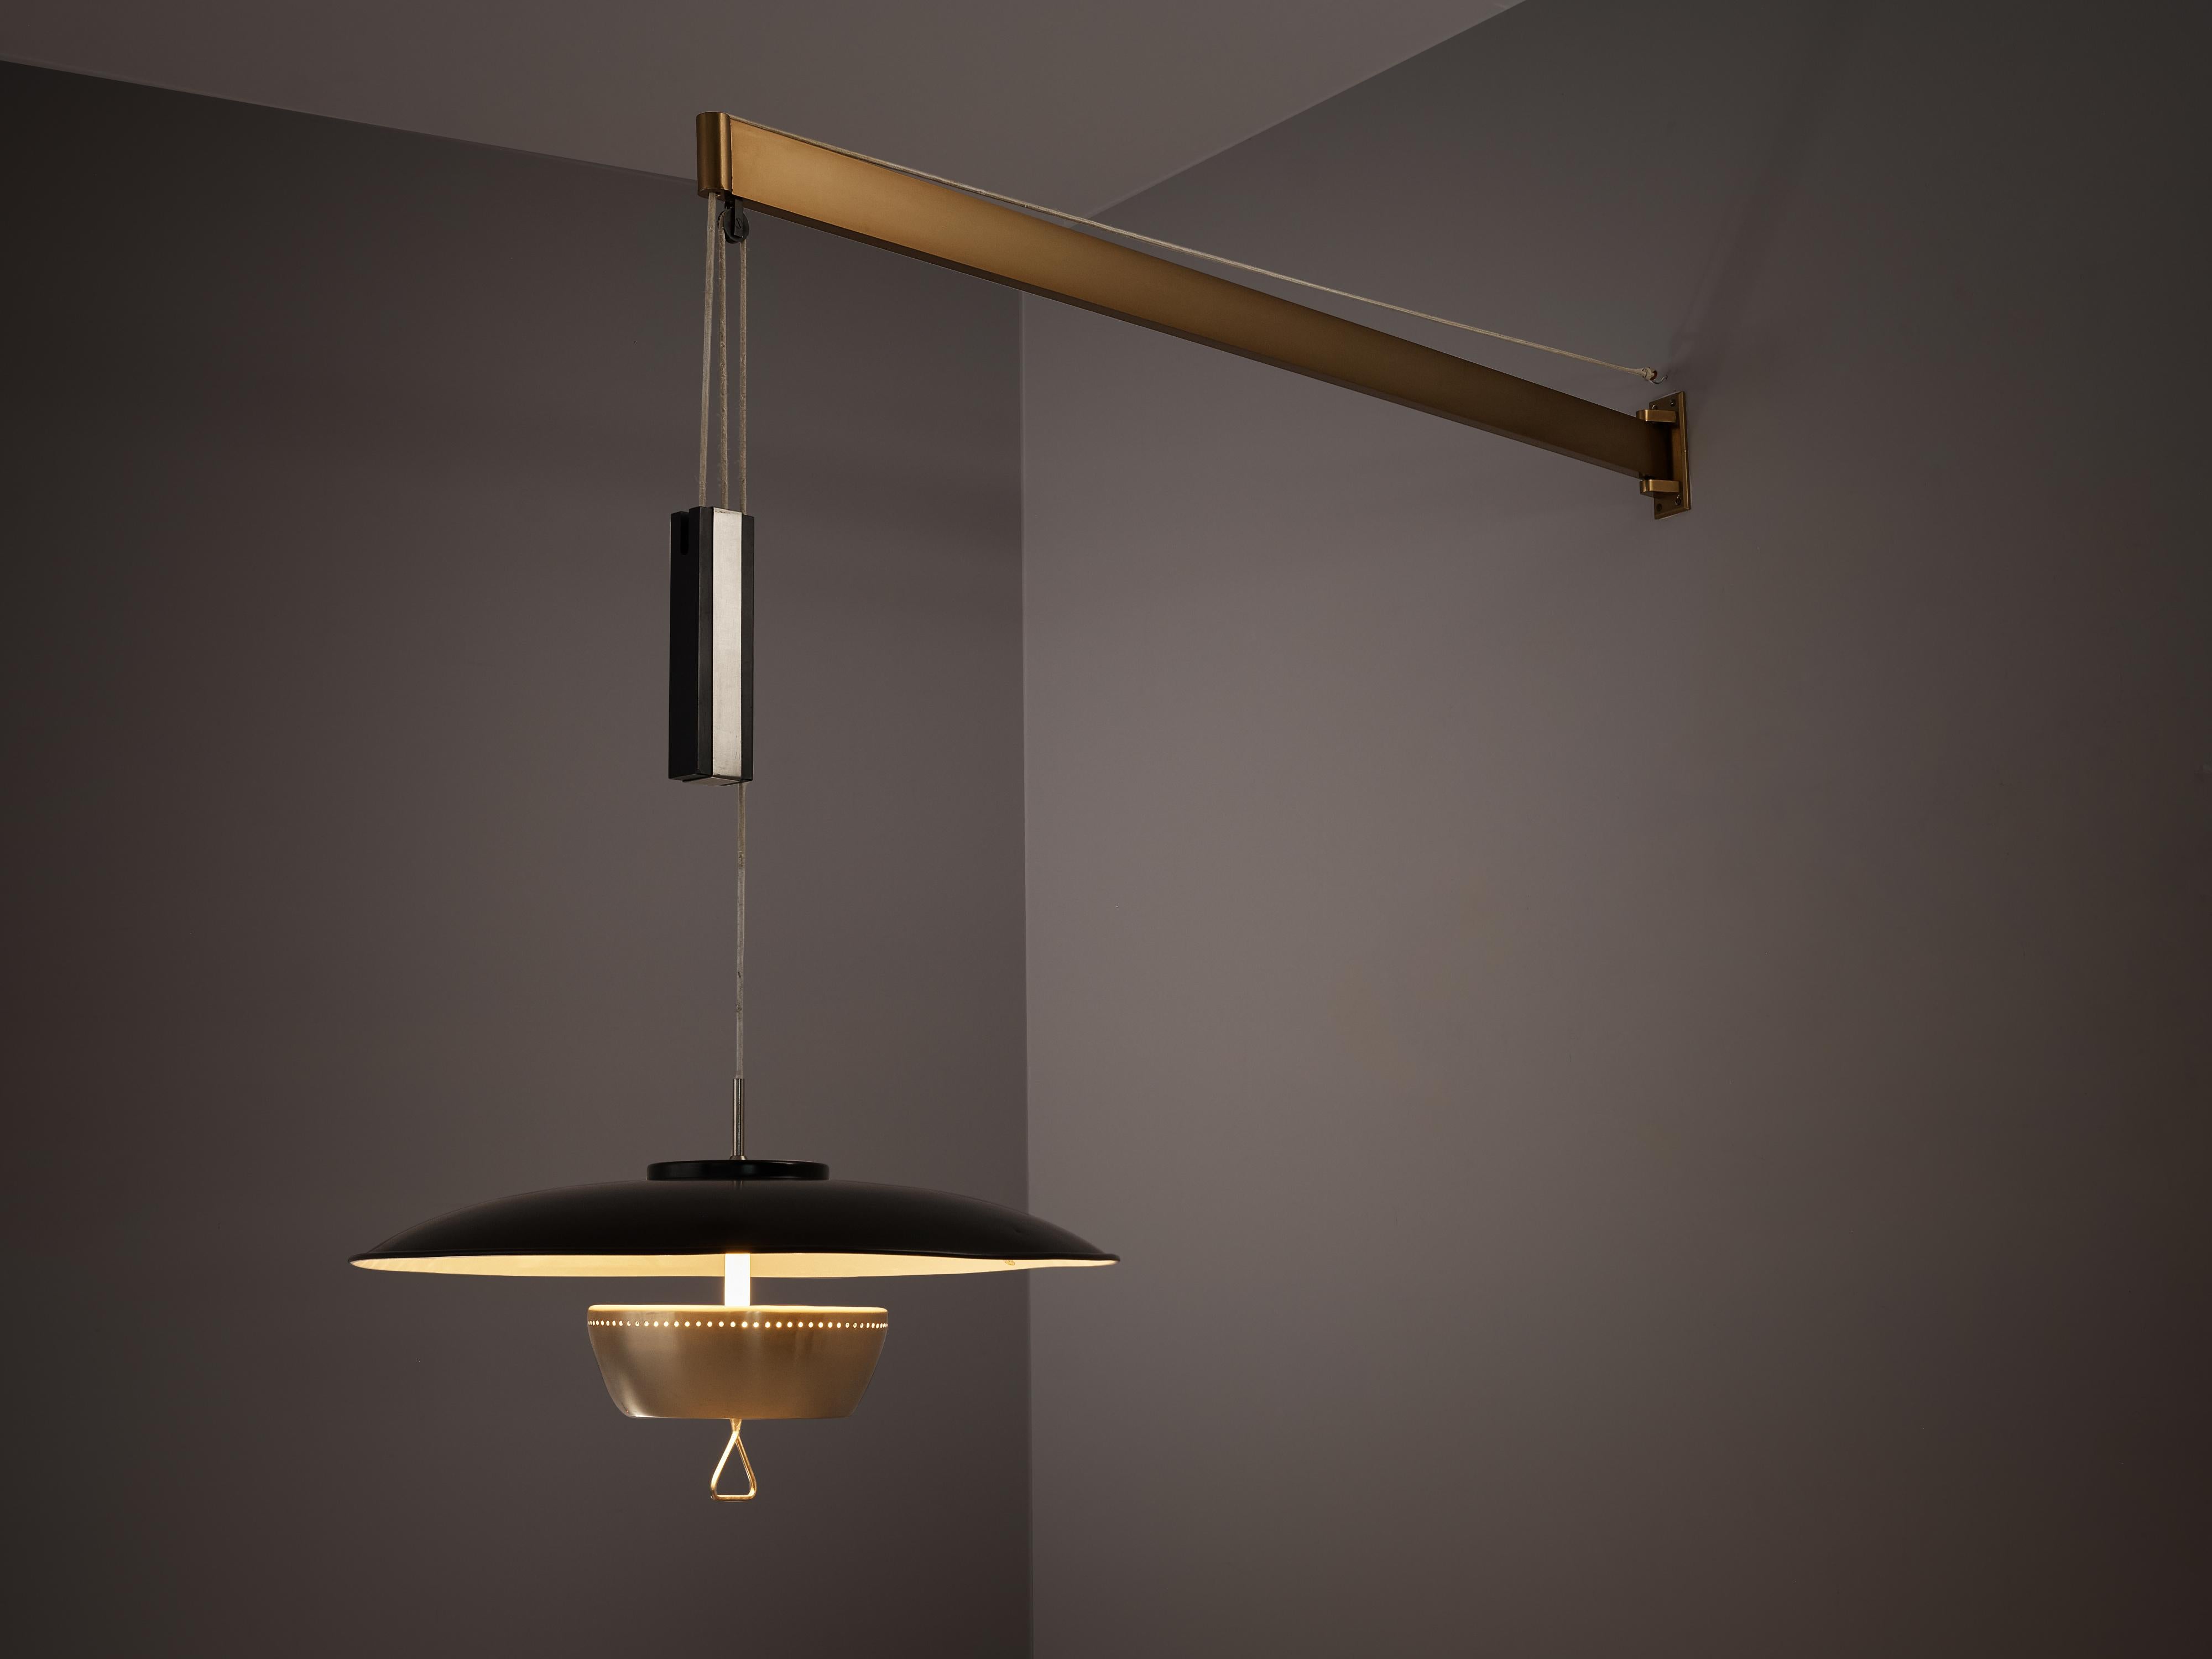 Gaetano Sciolari for Stilnovo, wall lamp model 1244, aluminum, brass, Italy, circa 1950

Elegant and modern wall-mounted pendant with a black coated shade by Sciolari. Adjustable in height due the counterweight that hangs on a horizontal brass